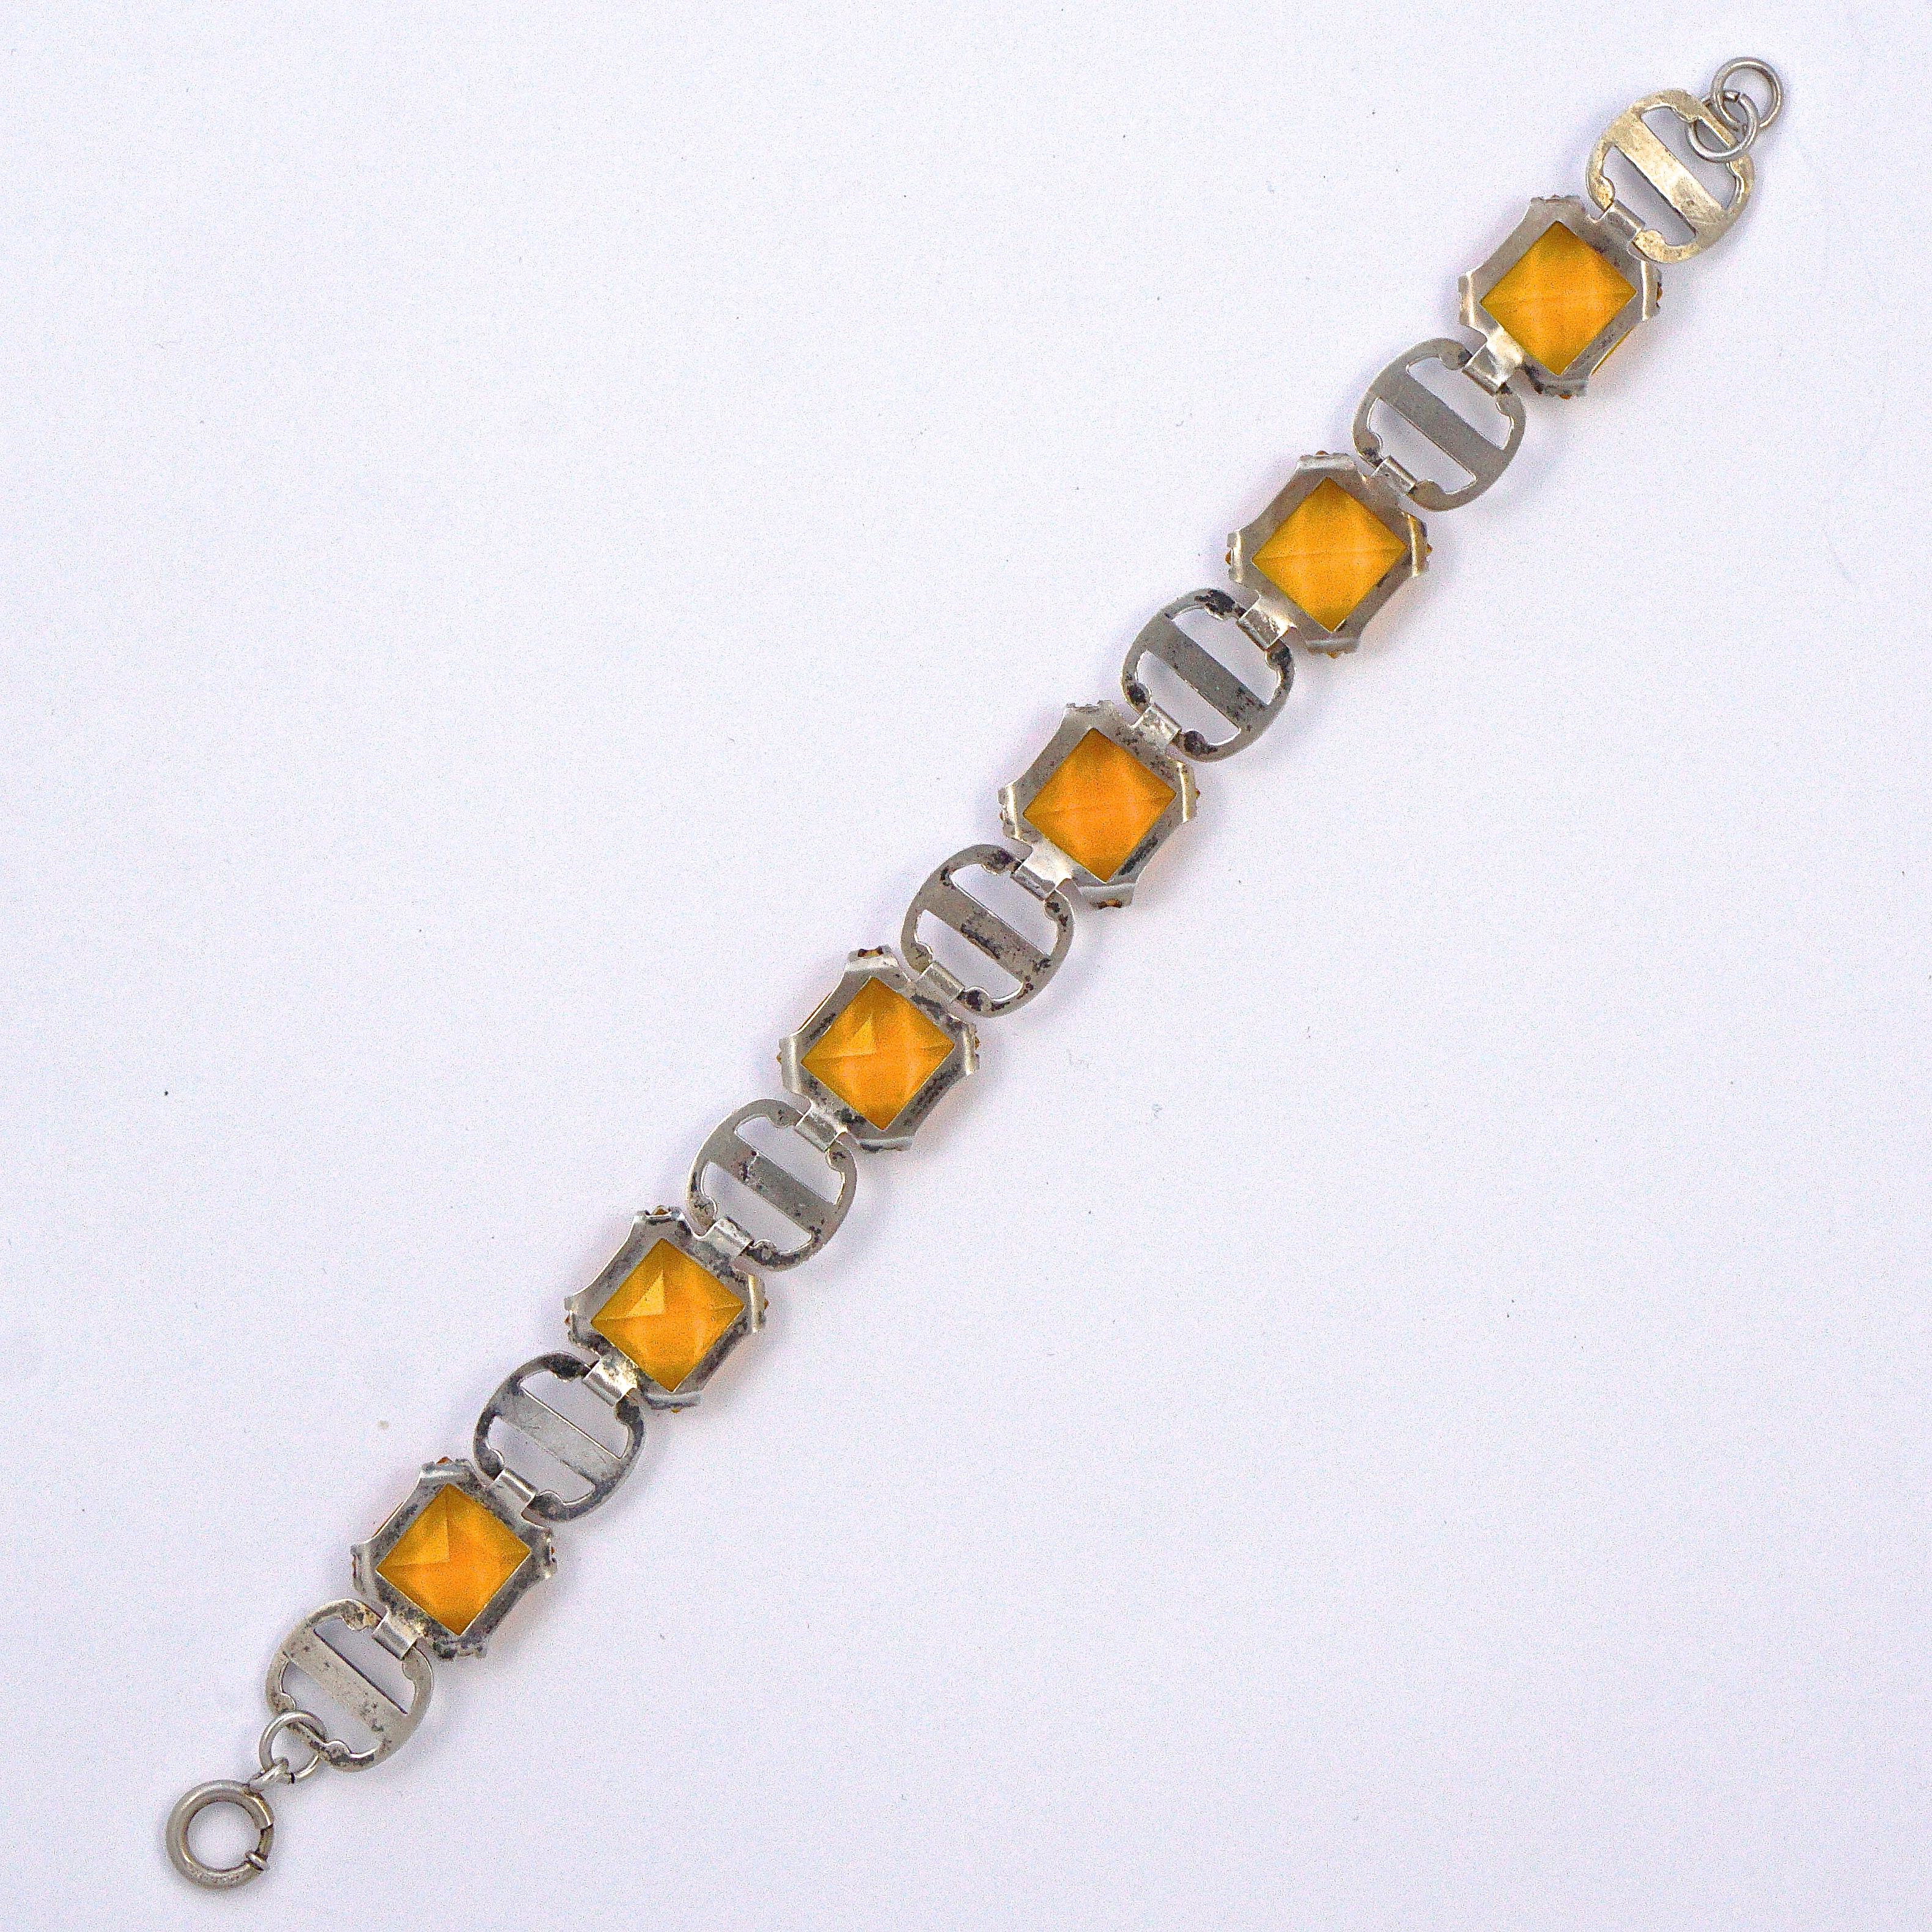 Women's or Men's Art Deco Sterling Silver Link Bracelet with Faceted Amber Glass circa 1930s For Sale